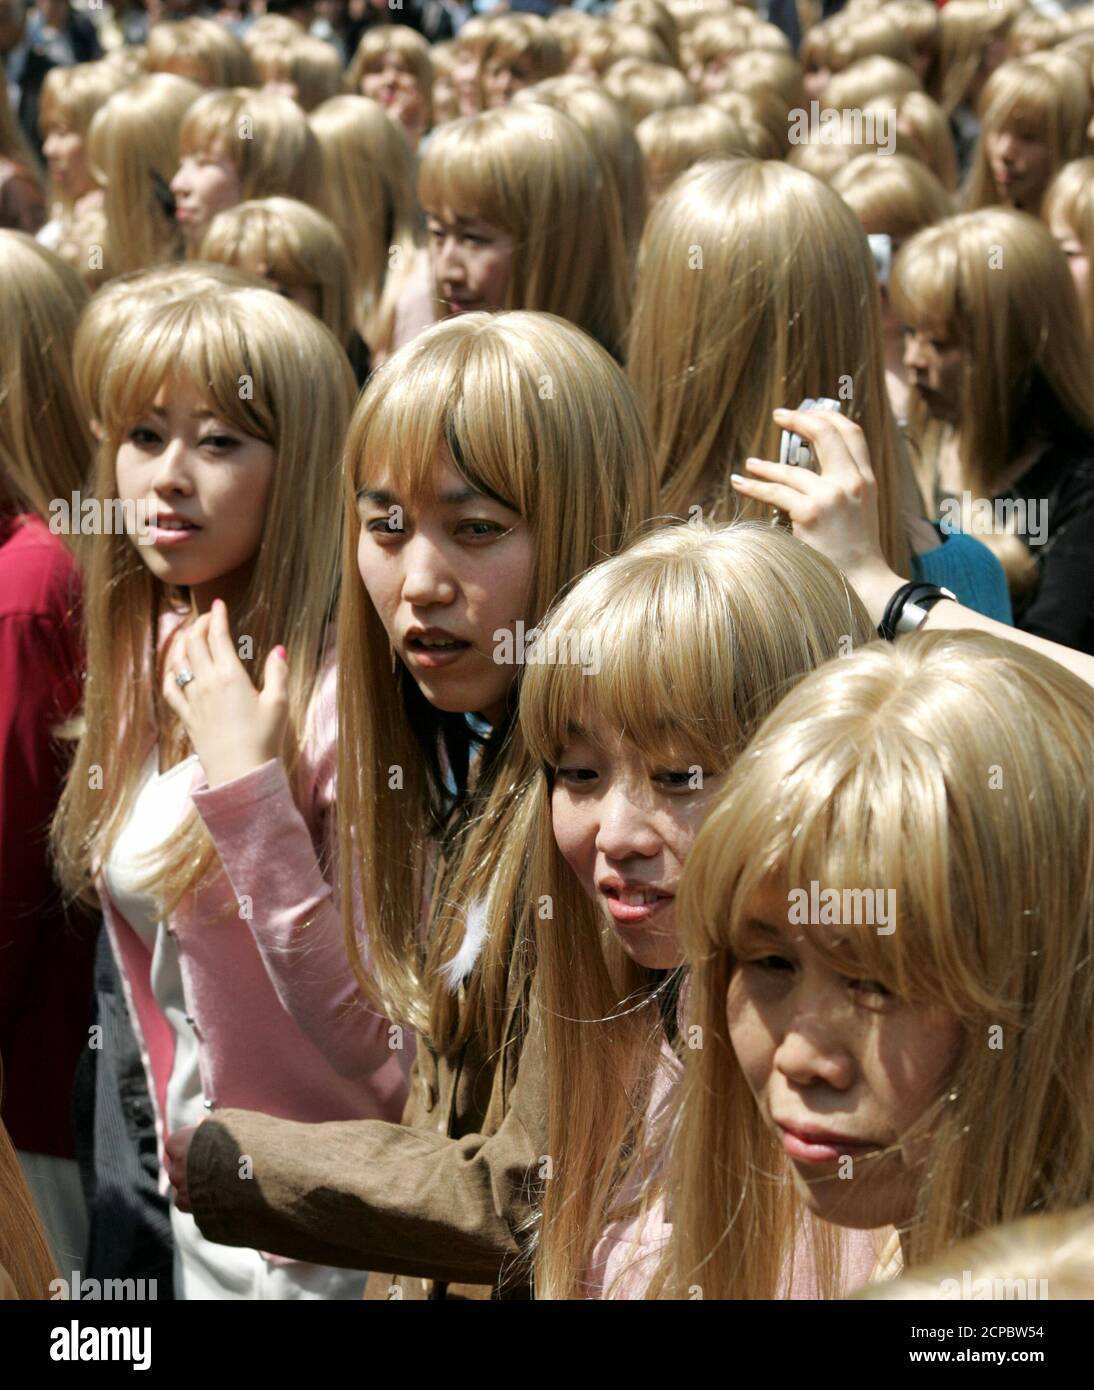 Japanese women wearing blonde wigs take part in a promotional event in  Tokyo April 10, 2005. About 300 Japanese women in identical blonde wigs  took part in the event on Sunday before